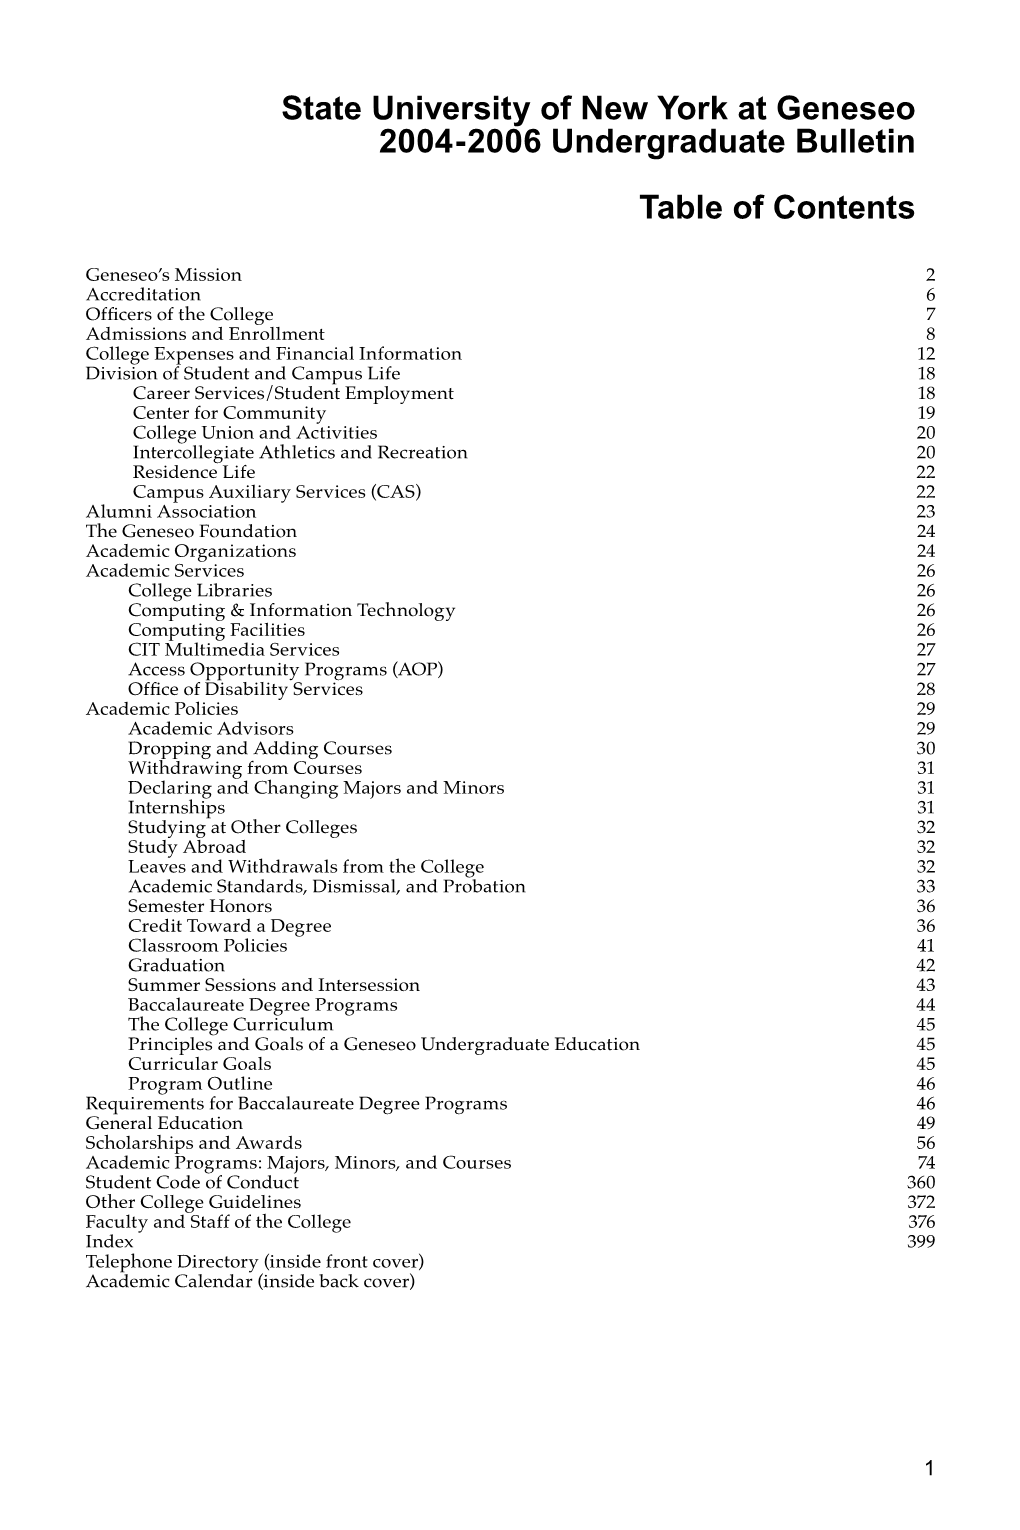 State University of New York at Geneseo 2004-2006 Undergraduate Bulletin Table of Contents